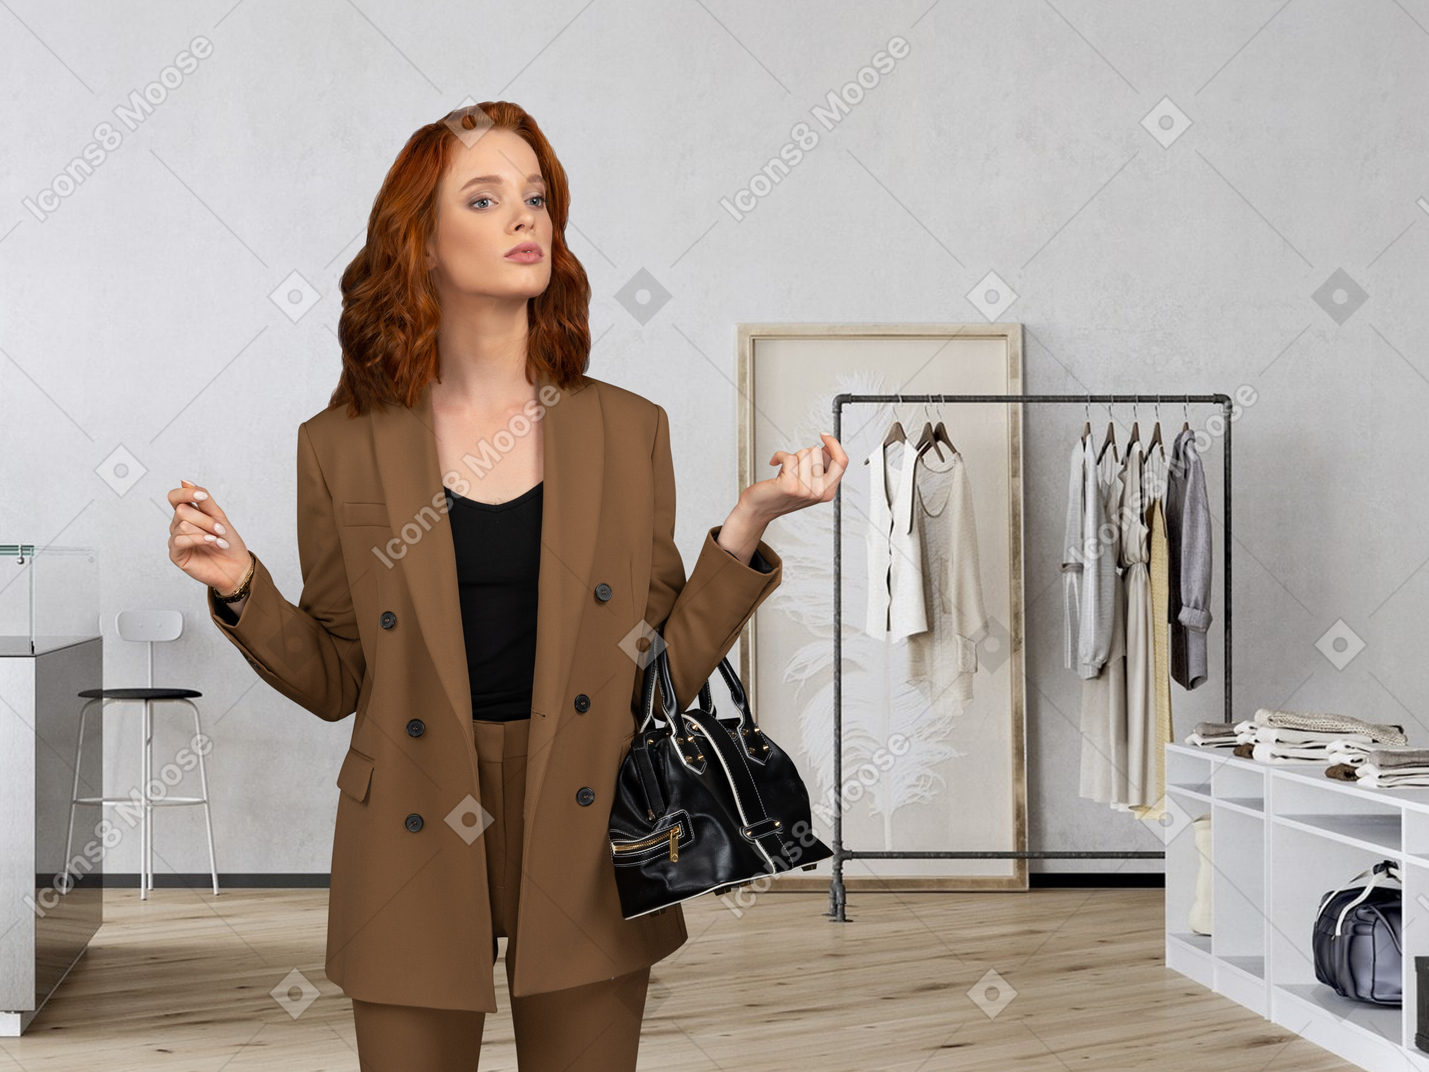 A woman standing in a clothing store holding a handbag